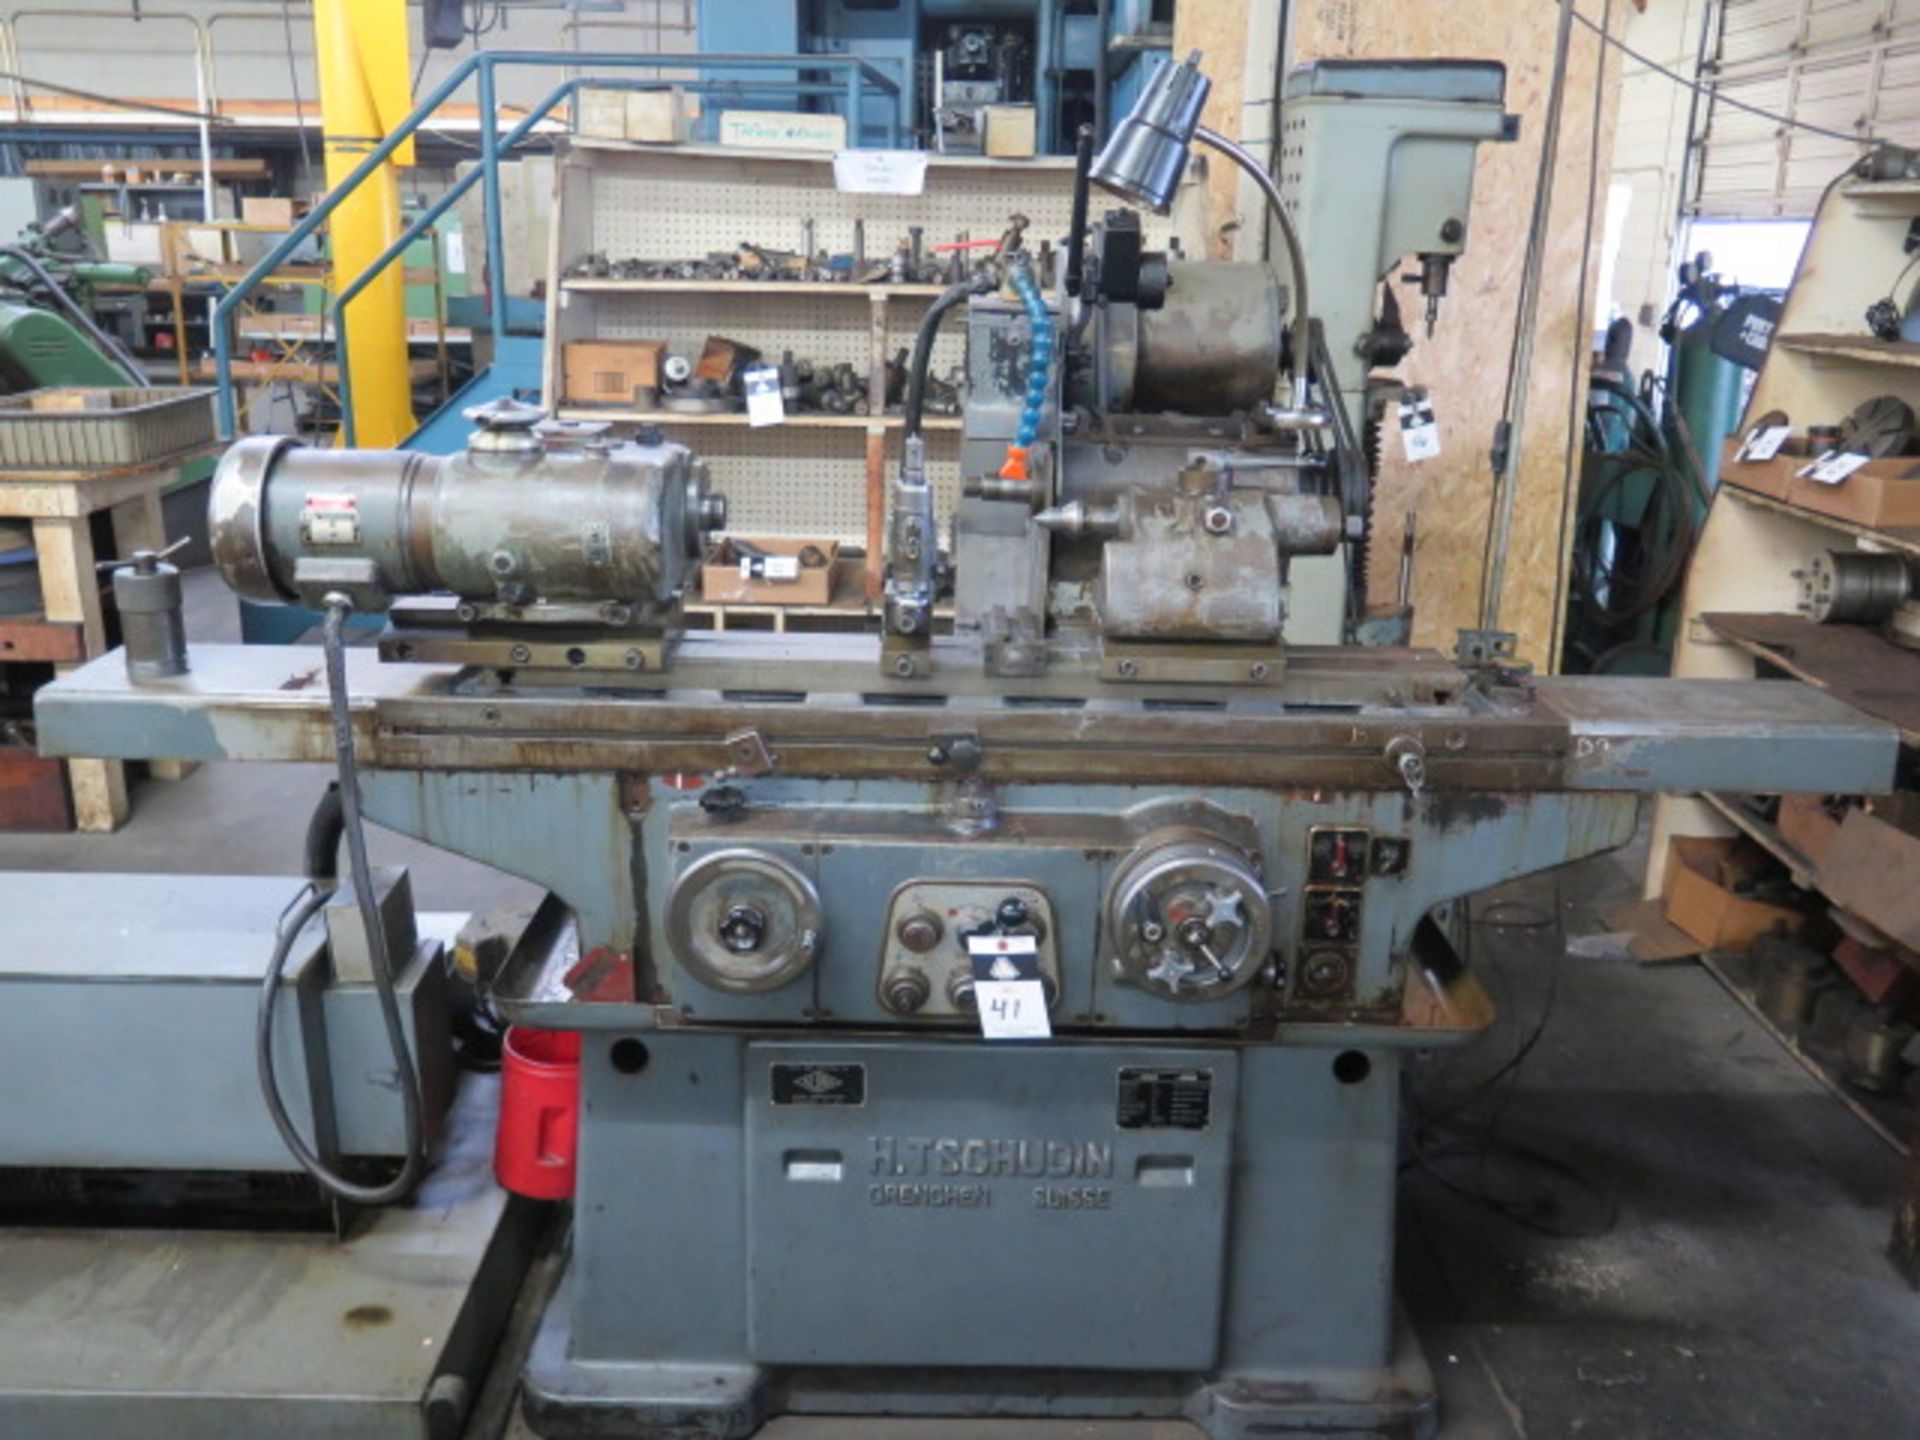 H. Tschudin HTG-600 Cylindrical Grinder s/n 64171 w/ Motorized Work Head, Tailstock, SOLD AS IS